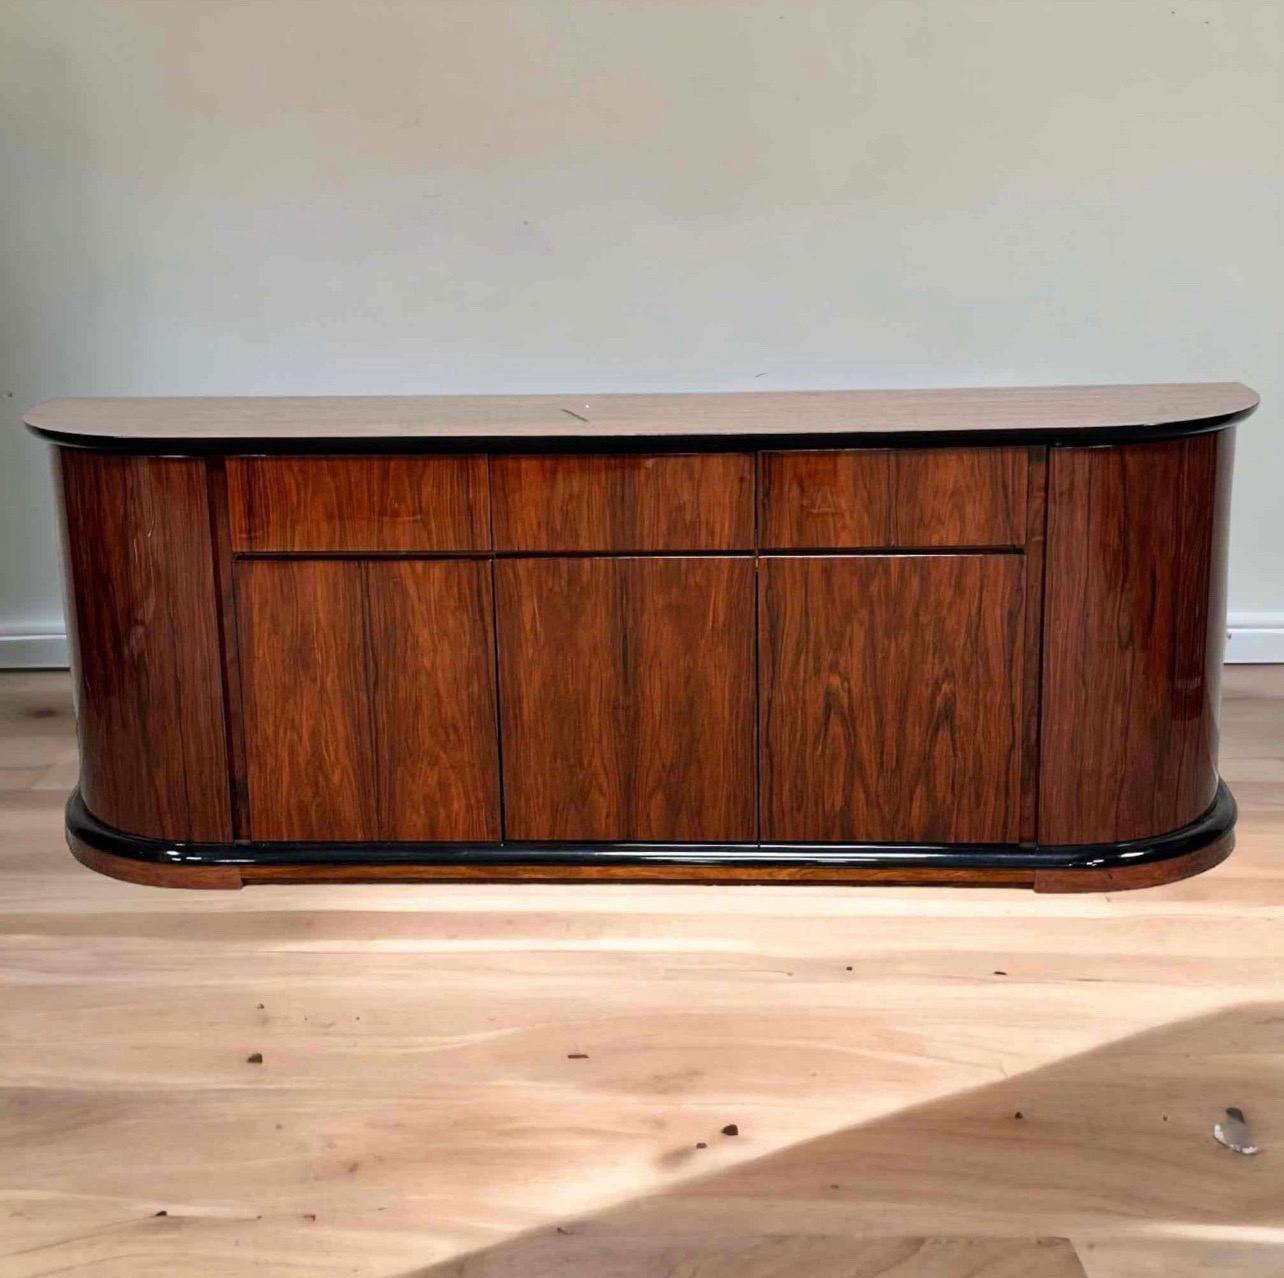 Rare Pietro Constantini Lacquered Wood Console/Credenze for Ello Furniture. Gorgeous Piece. 3 Drawers and storage under.

Condition Disclosure:
Please understand nearly all of our inventory is comprised of rare to very rare vintage pieces. They are